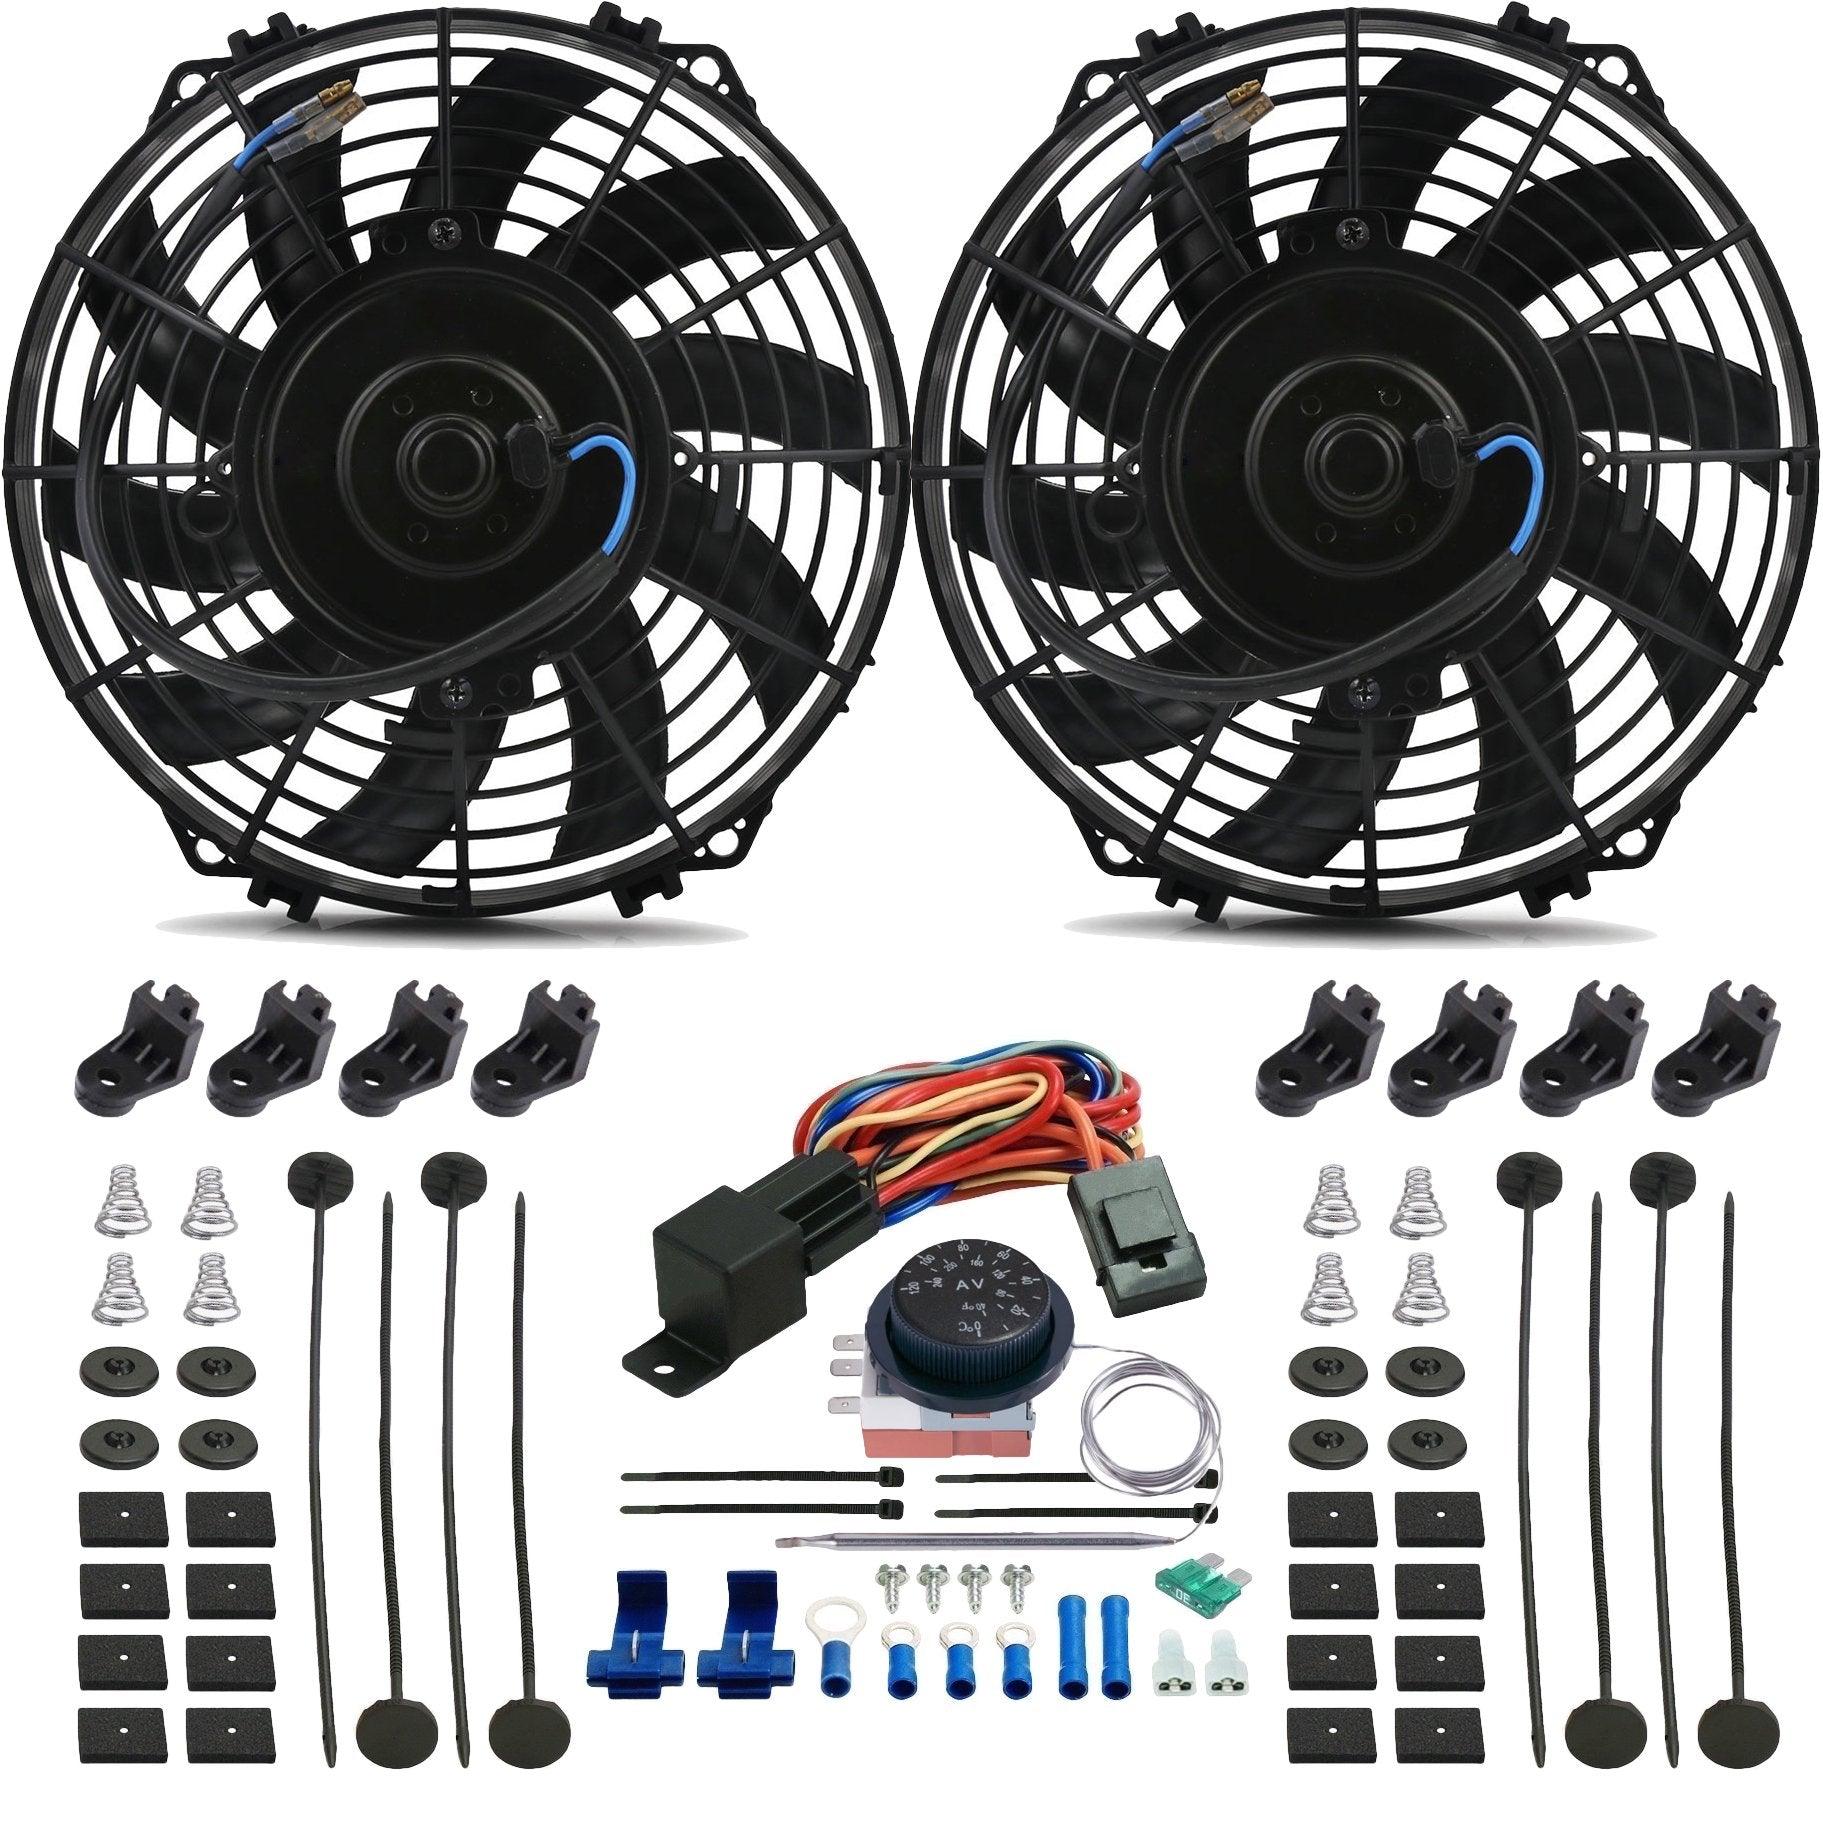 All Electric Radiator Cooling Fans – American Volt